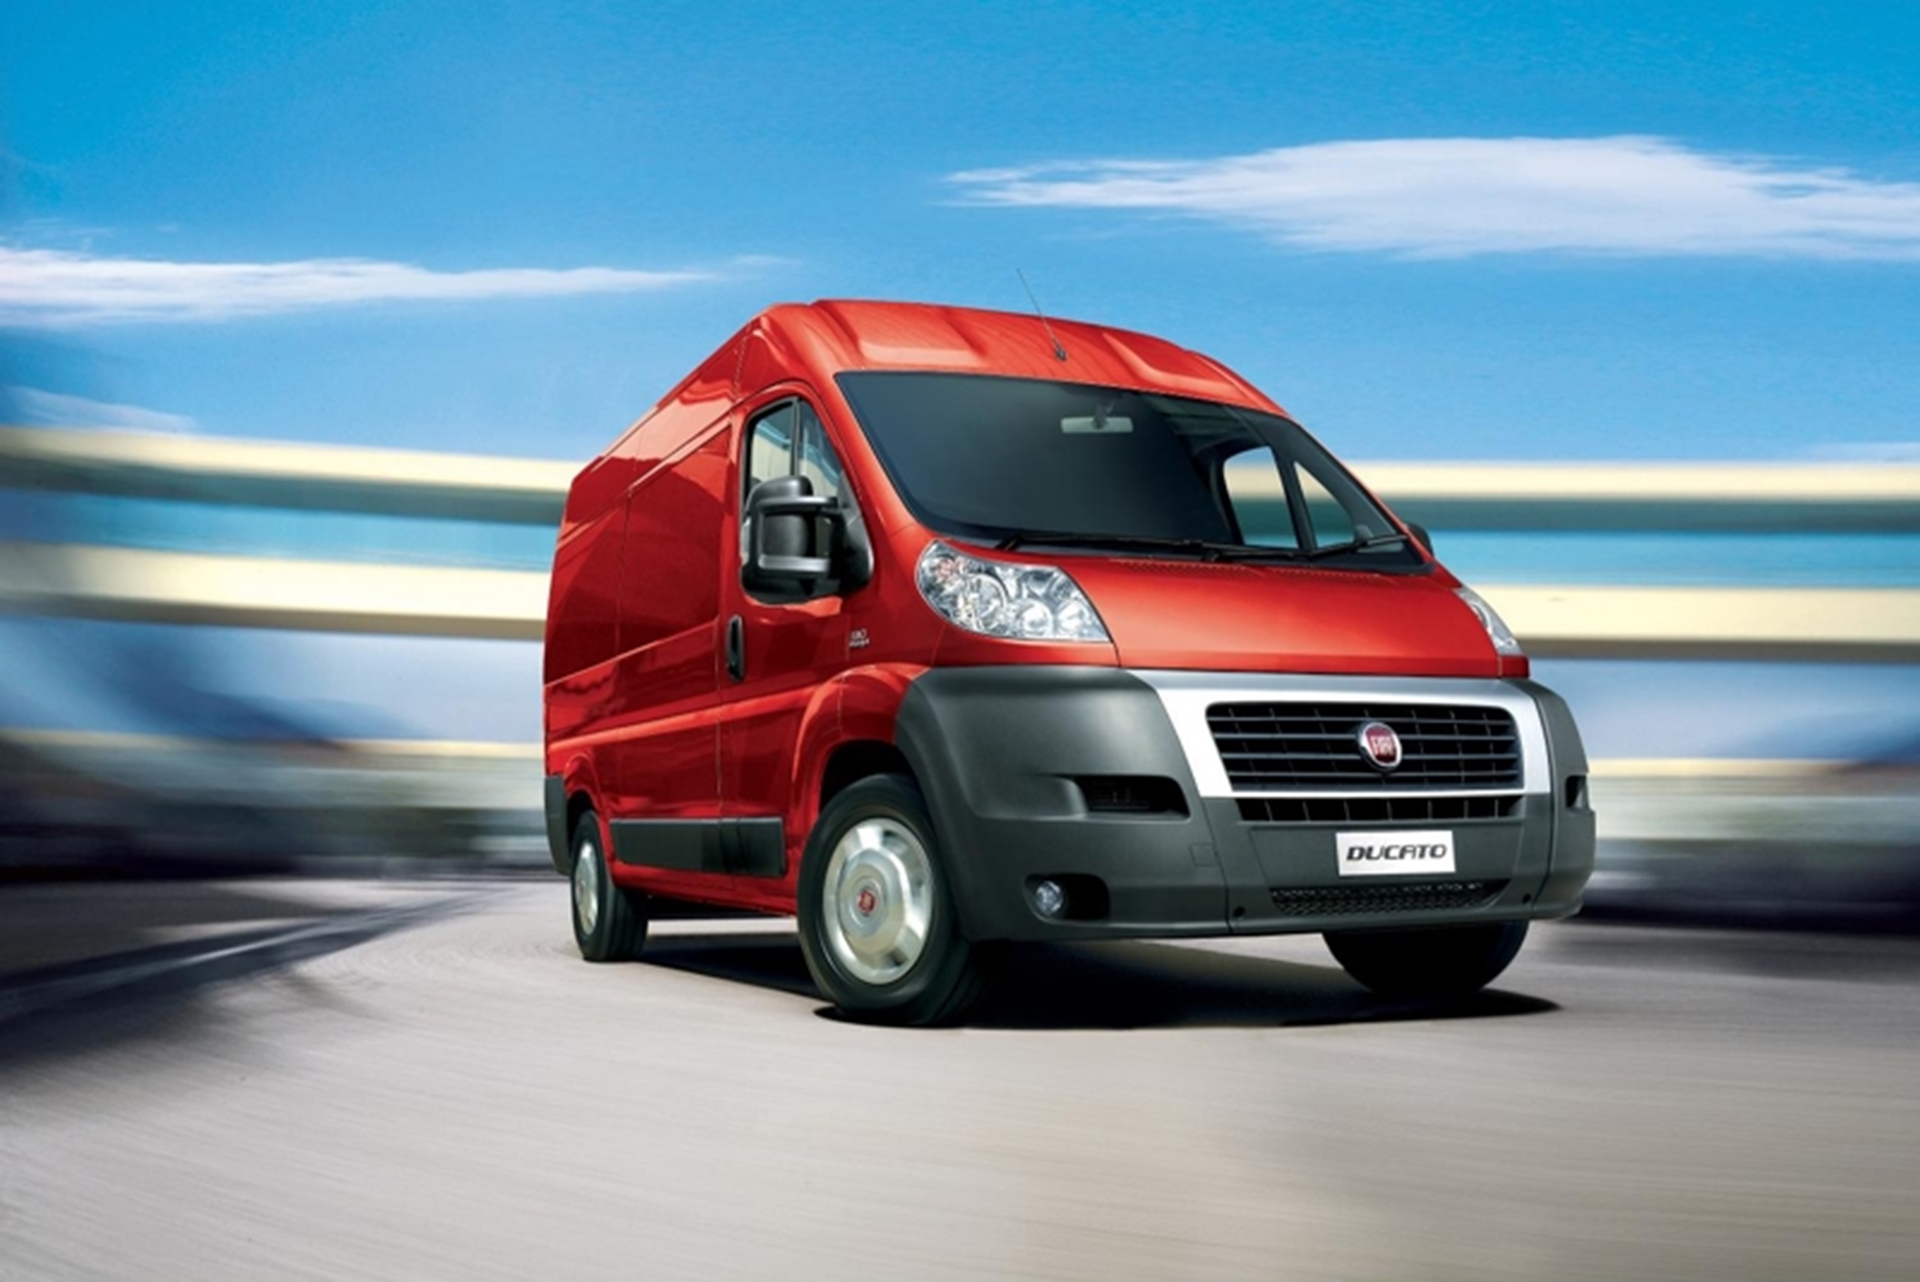 NEW SPECIAL SERIES DUCATO TECNICO PROVIDES EXTRA VALUE FOR CUSTOMERS